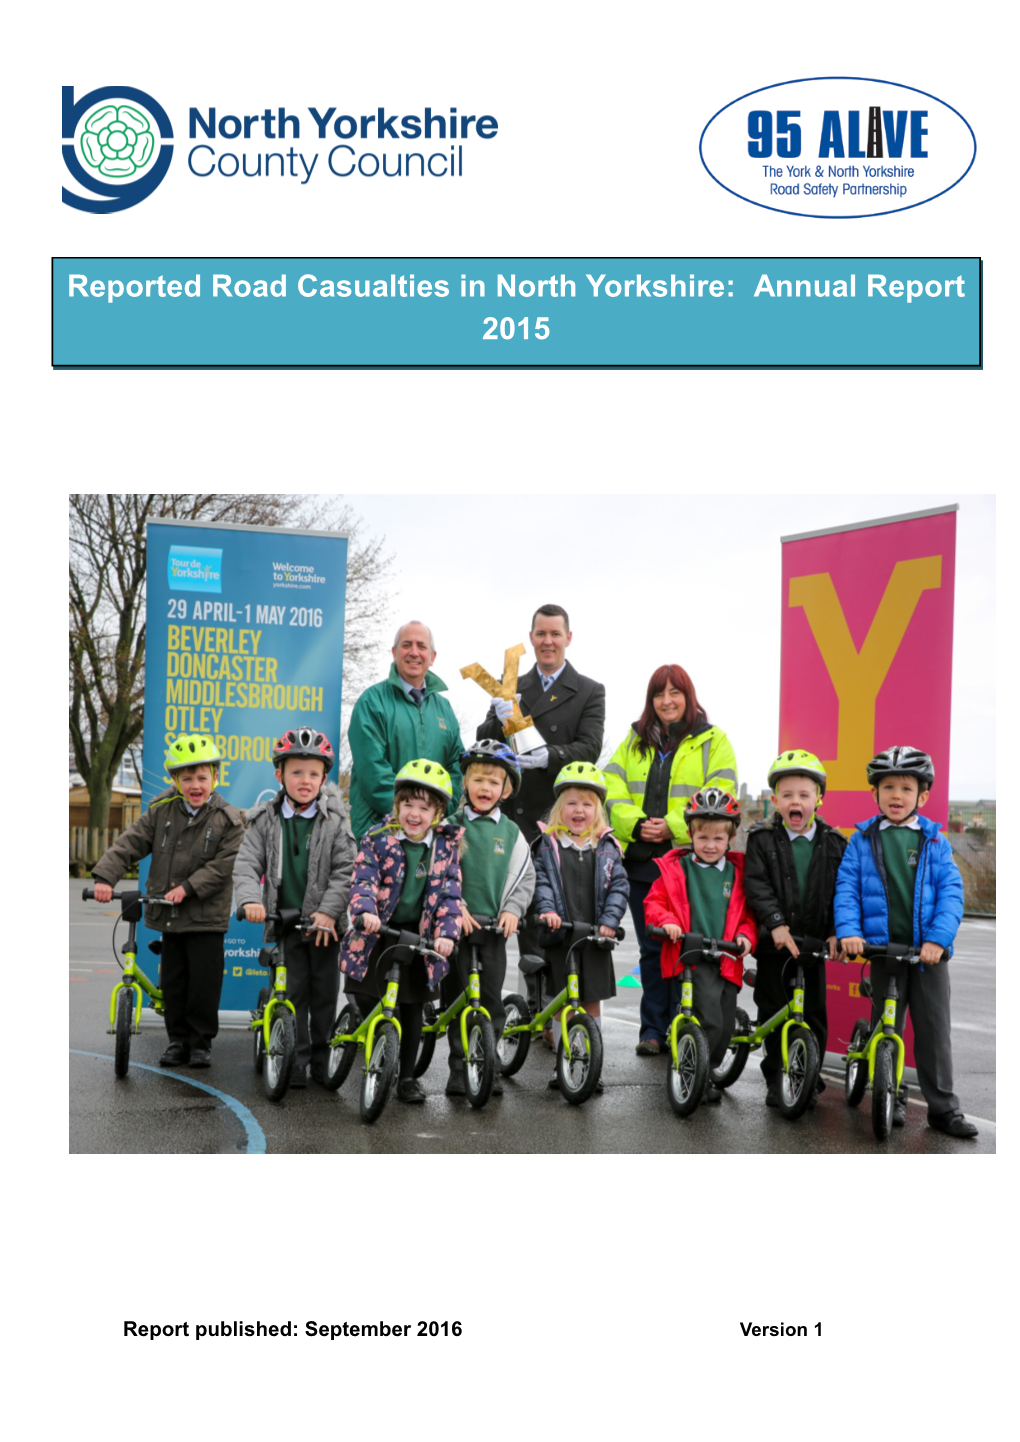 Reported Road Casualties in North Yorkshire: Annual Report 2015